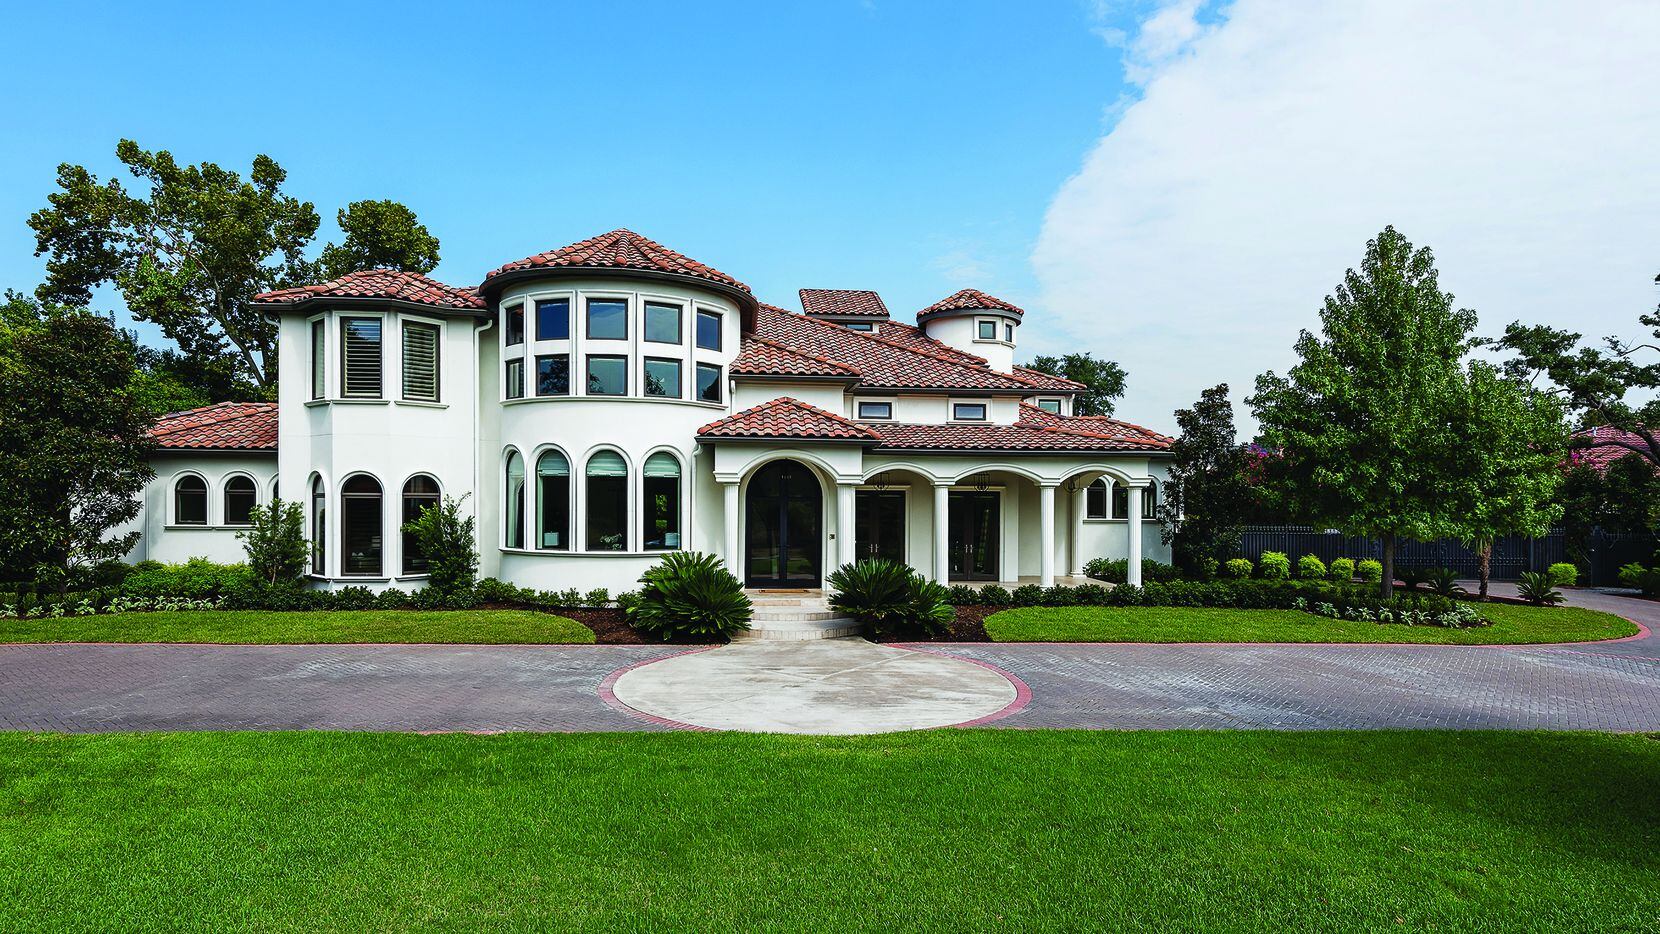 The Mediterranean residence at 4525 Catina is situated on 1.2 acres in Preston Hollow.